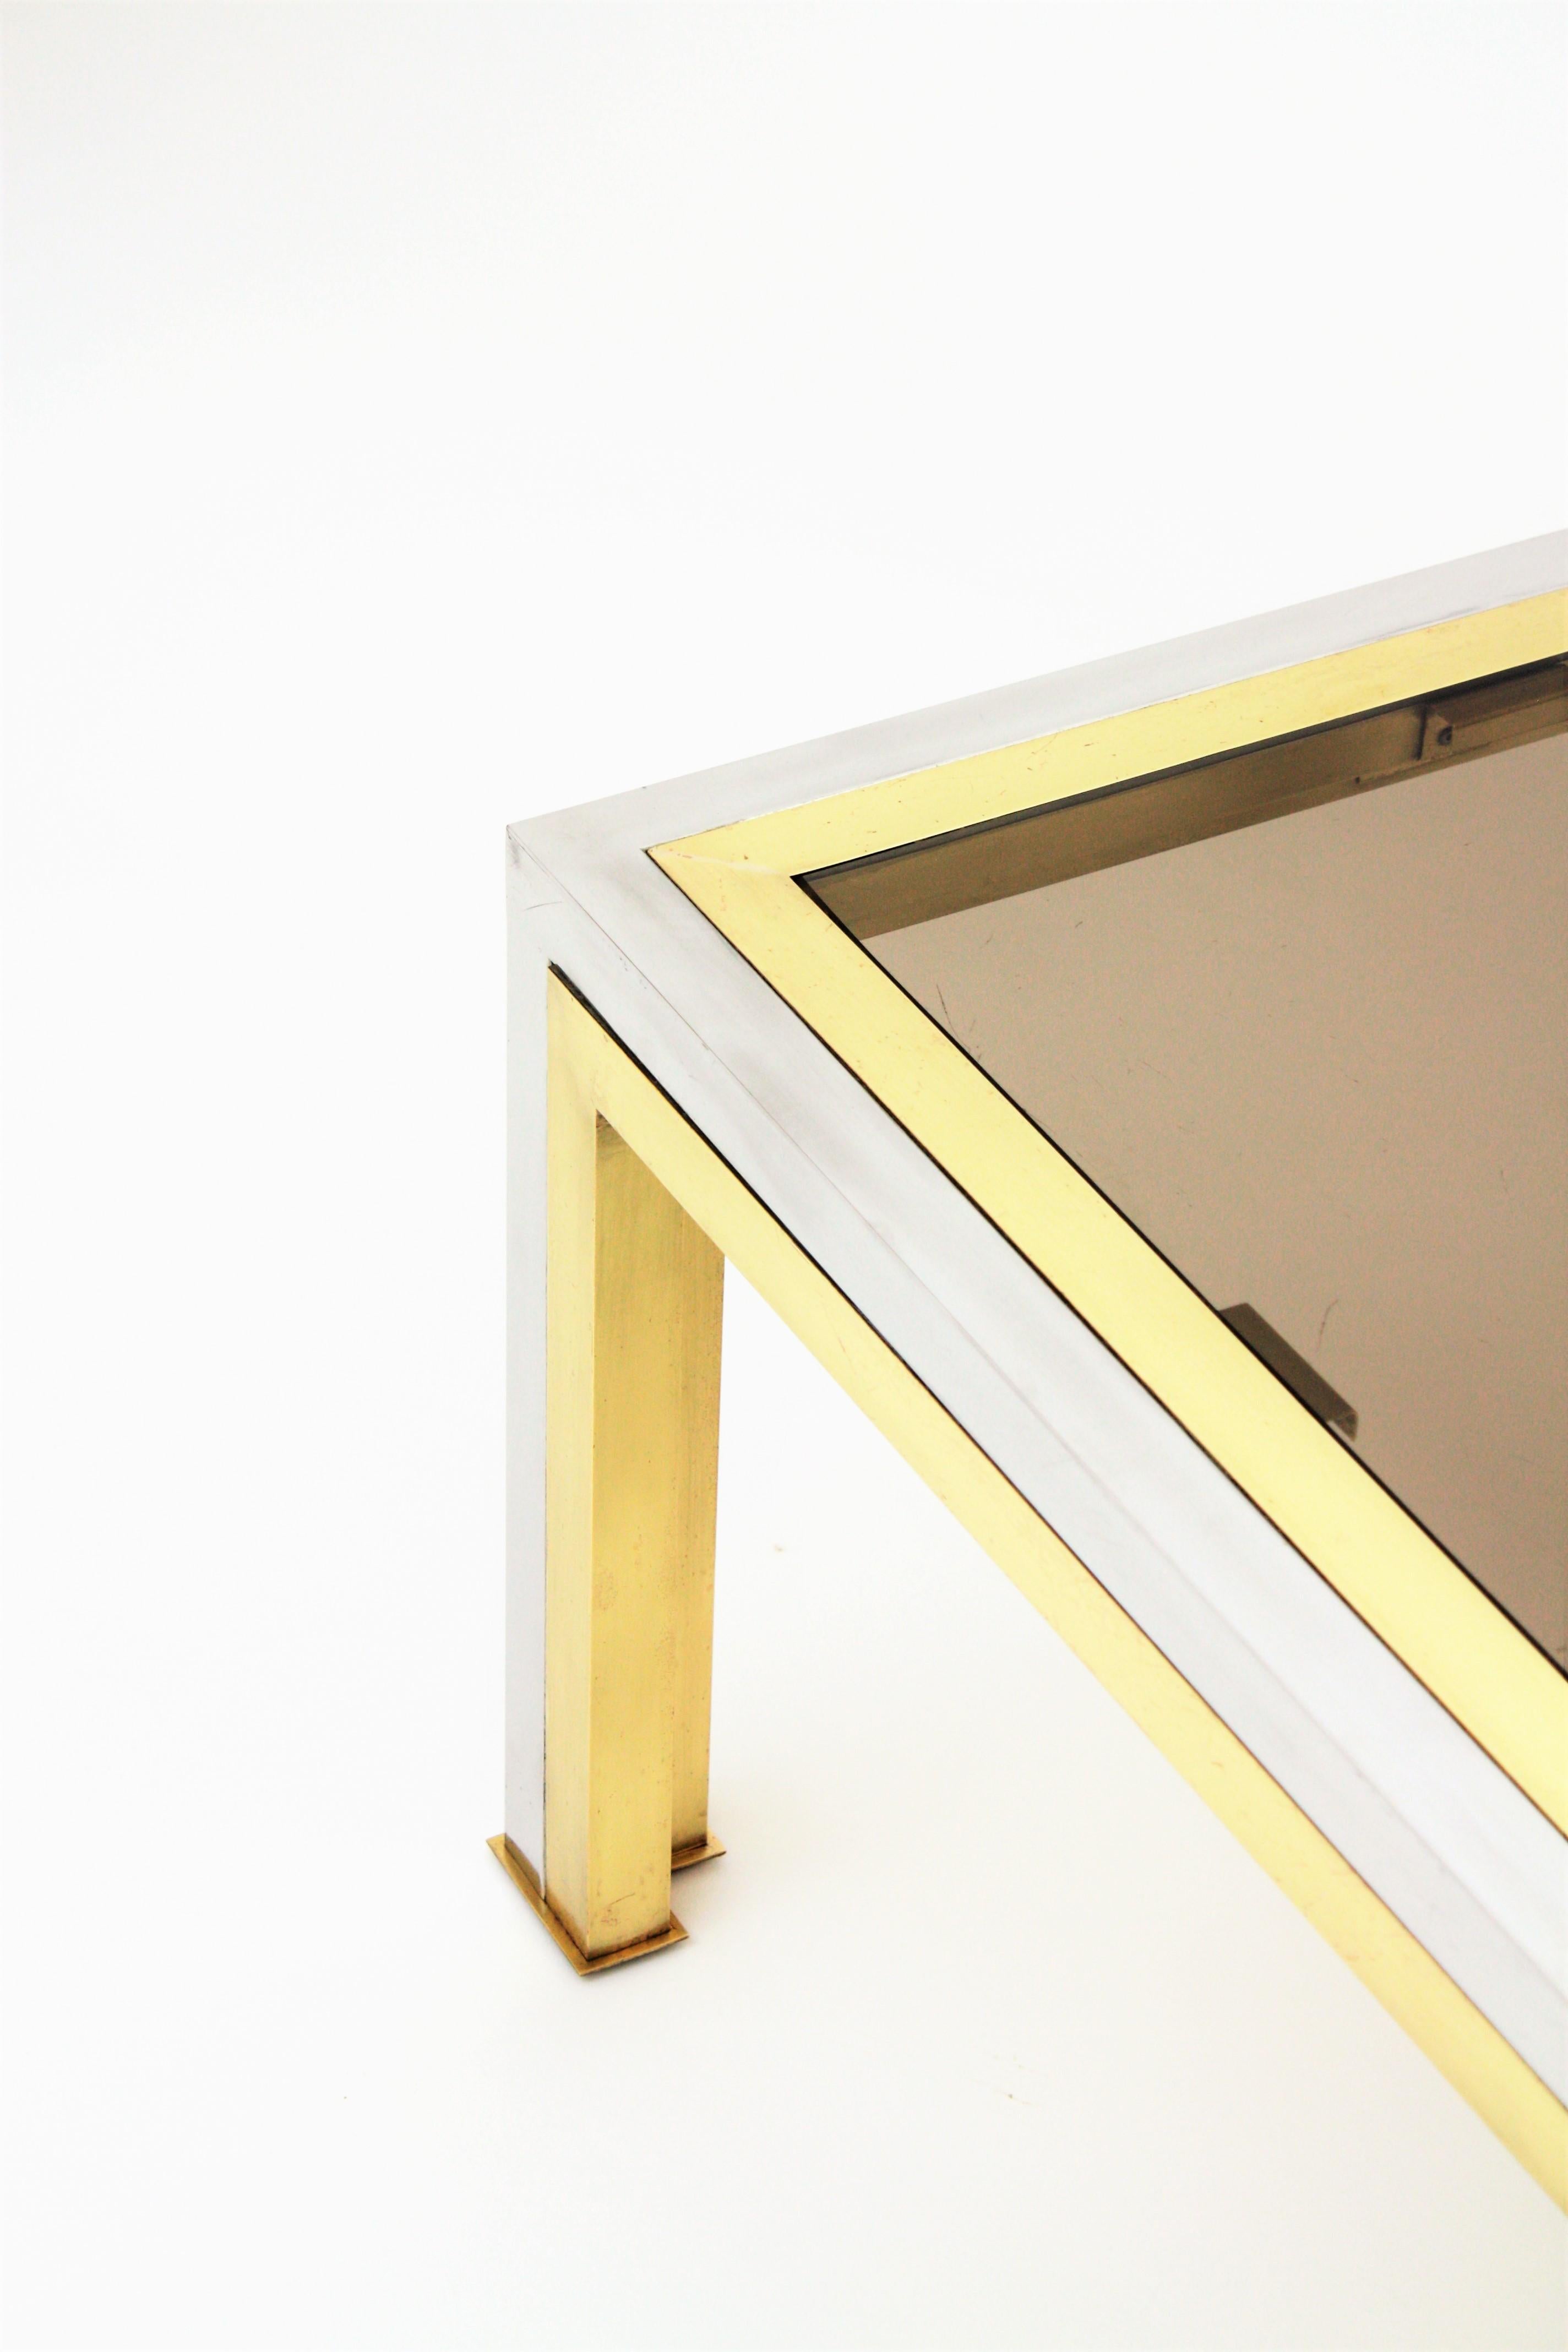 Romeo Rega Coffee Table in Brass, Chromed Steel and Glass 8